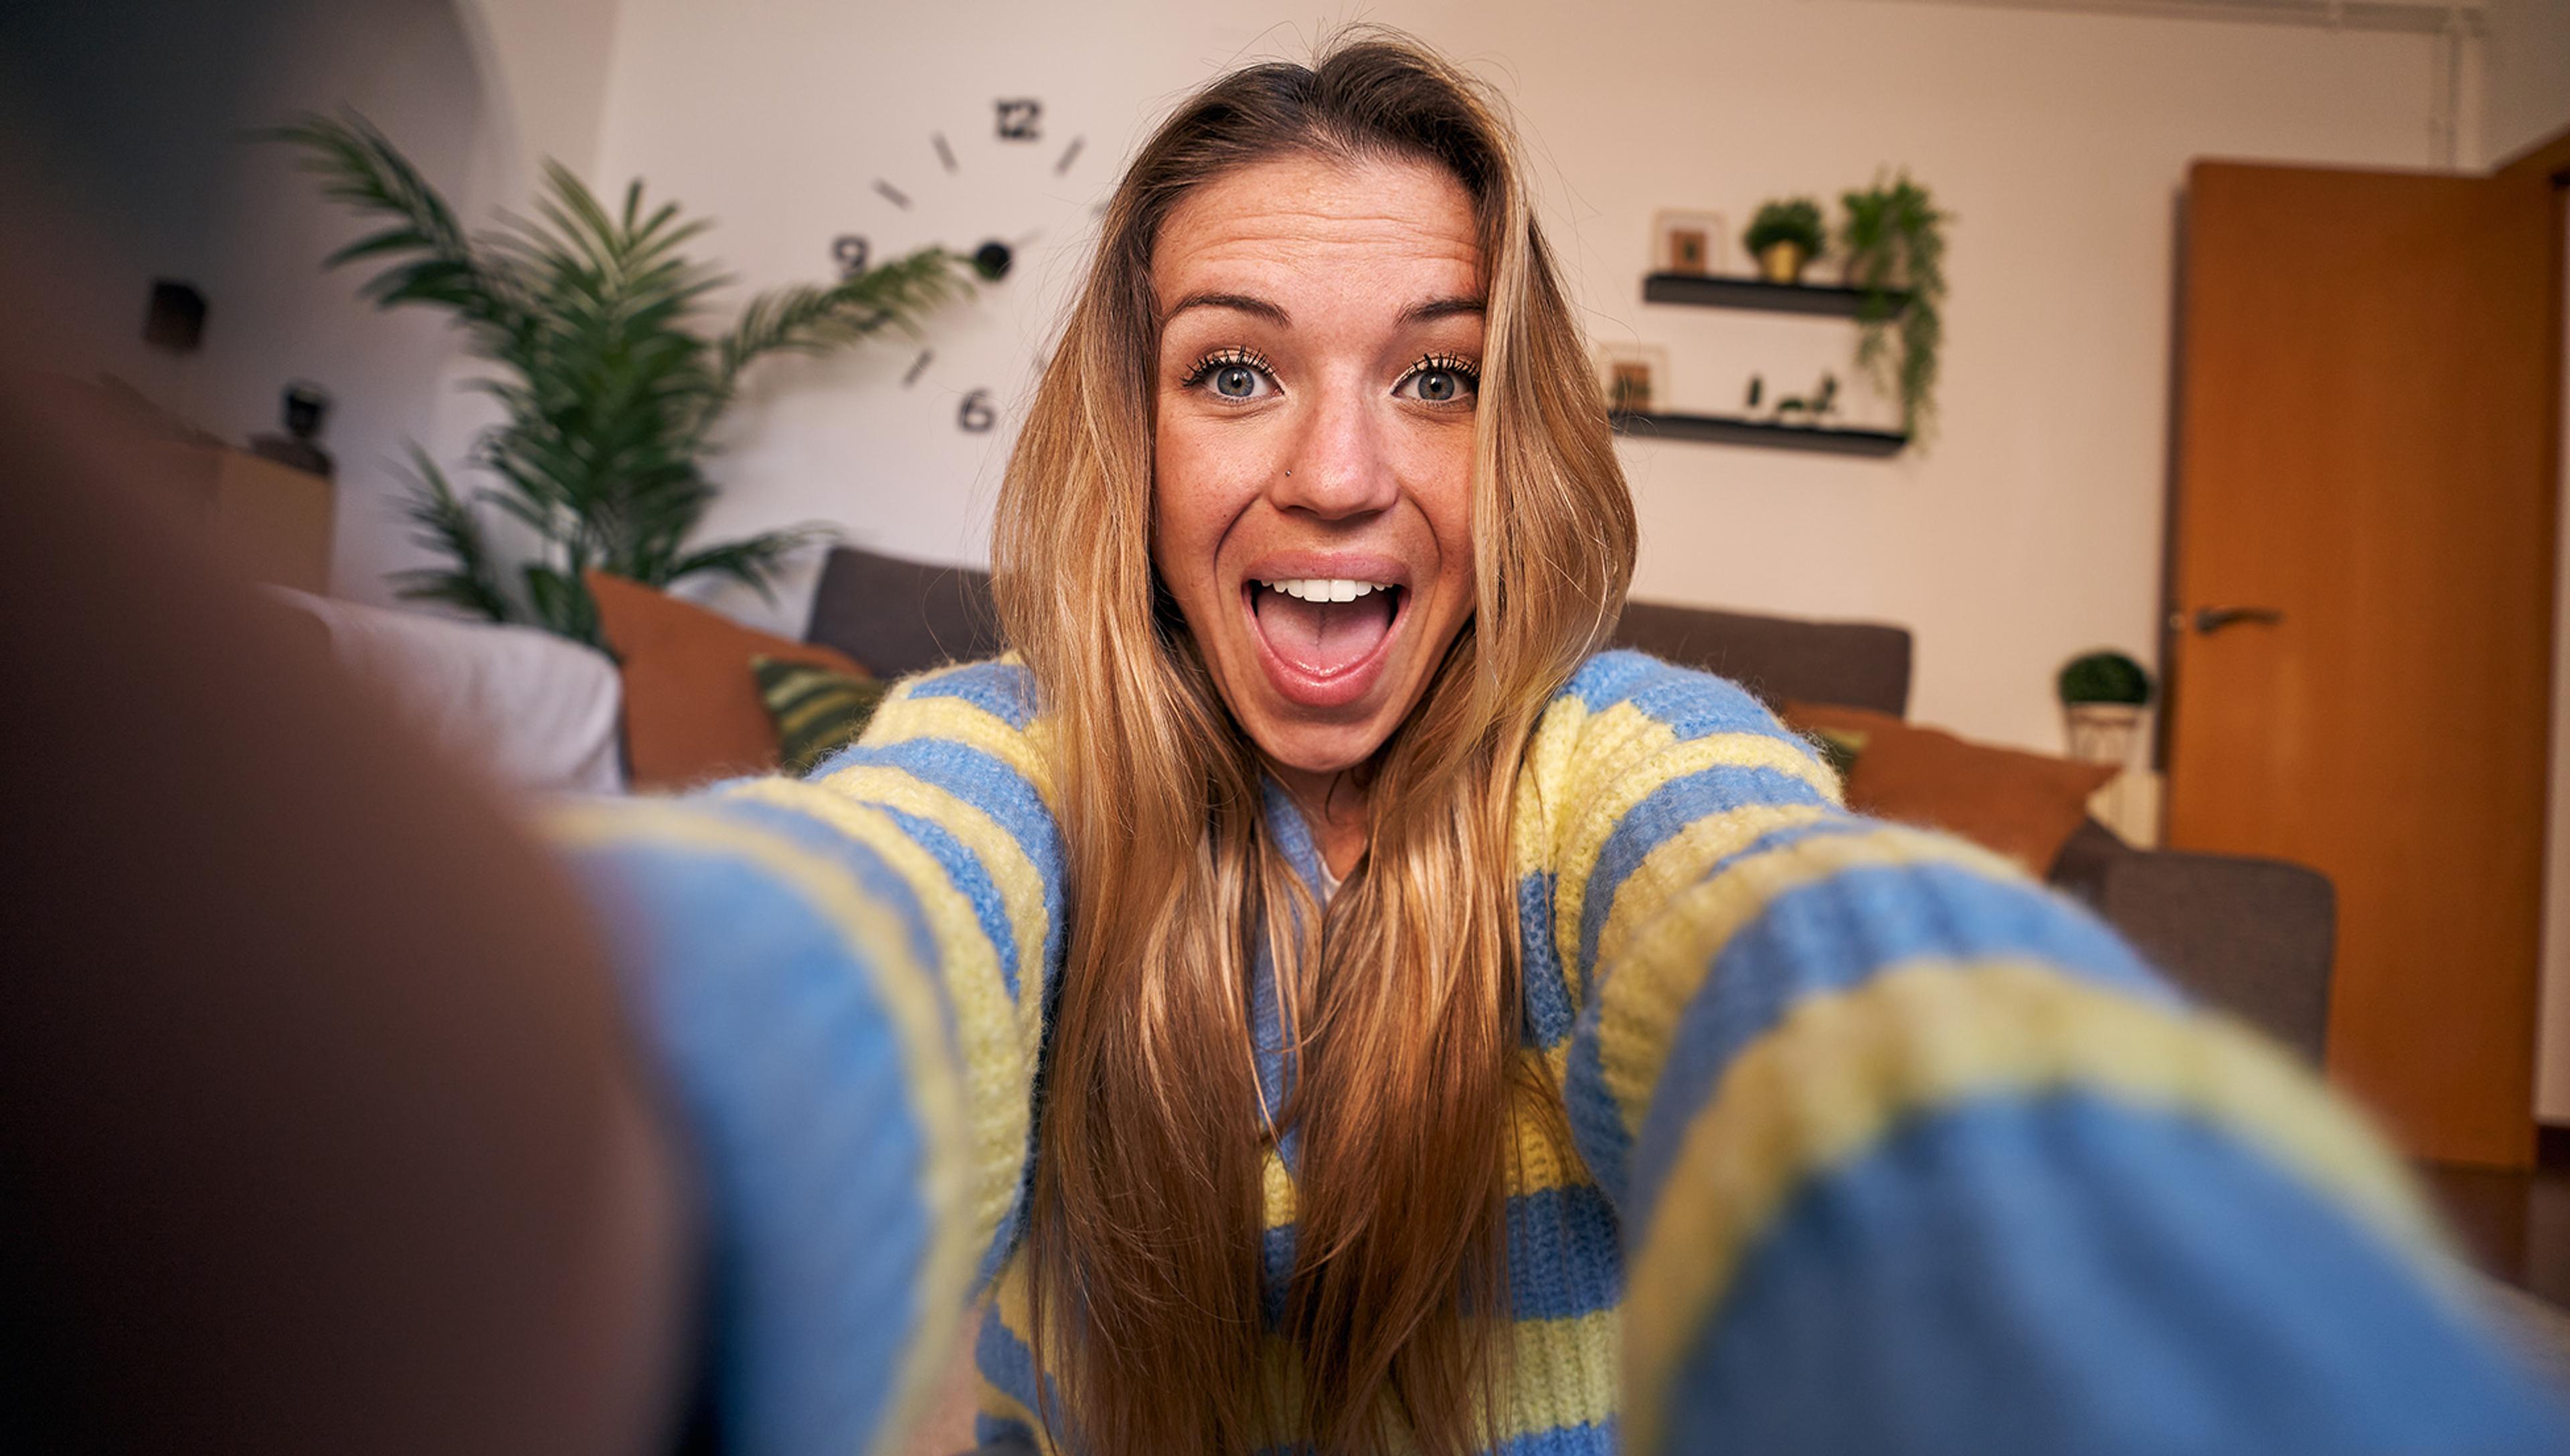 A woman with long blonde hair and a striped blue and yellow jumper takes a selfie, smiling broadly. Behind her, a living room is visible with a large potted plant, a grey couch, and wall shelves with small plants and decor items. A clock is fixed on the wall in the background.